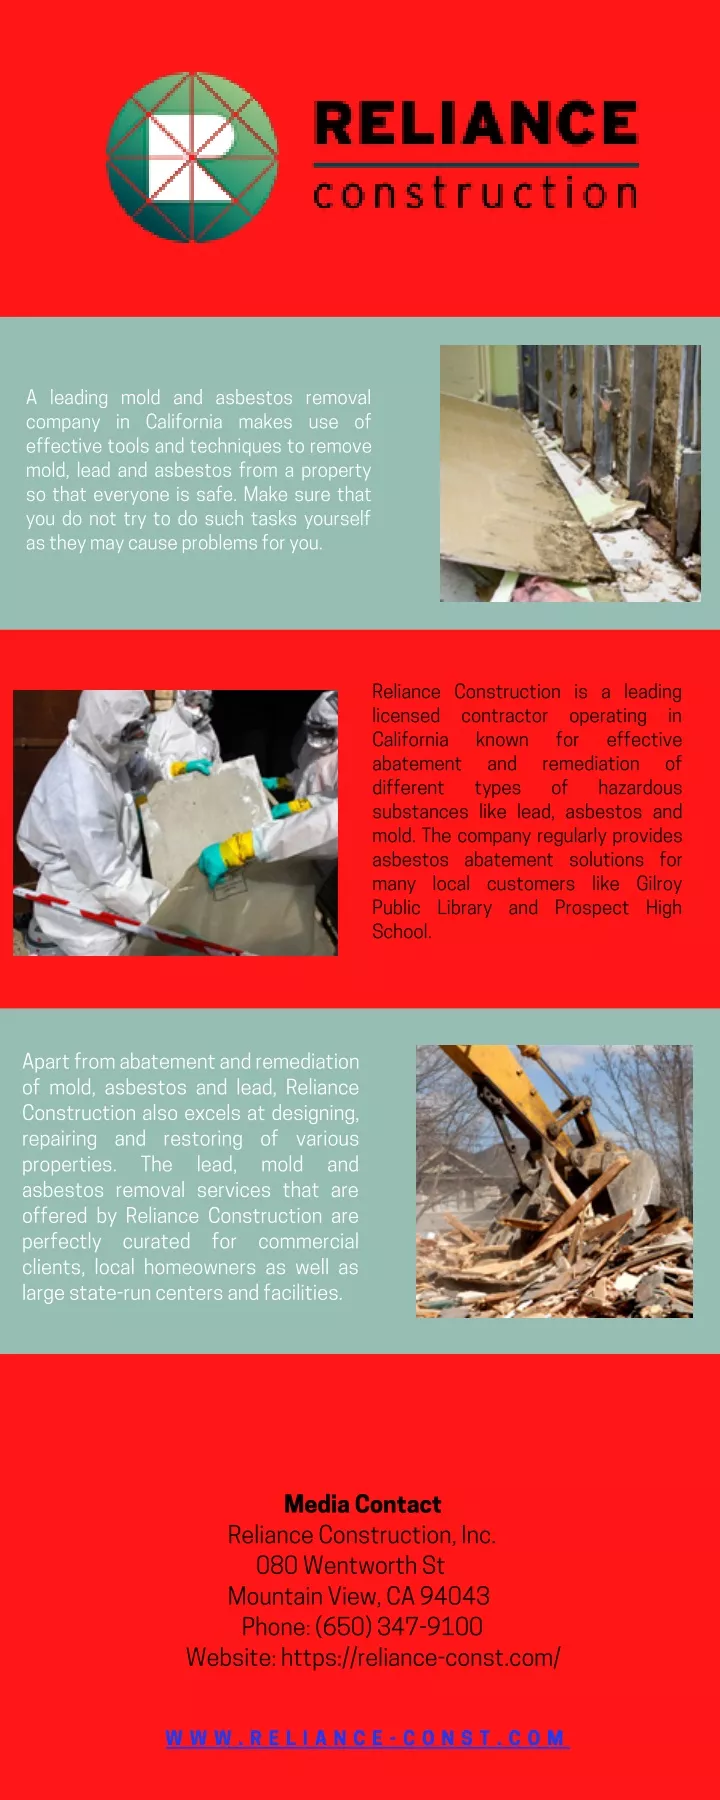 a leading mold and asbestos removal company